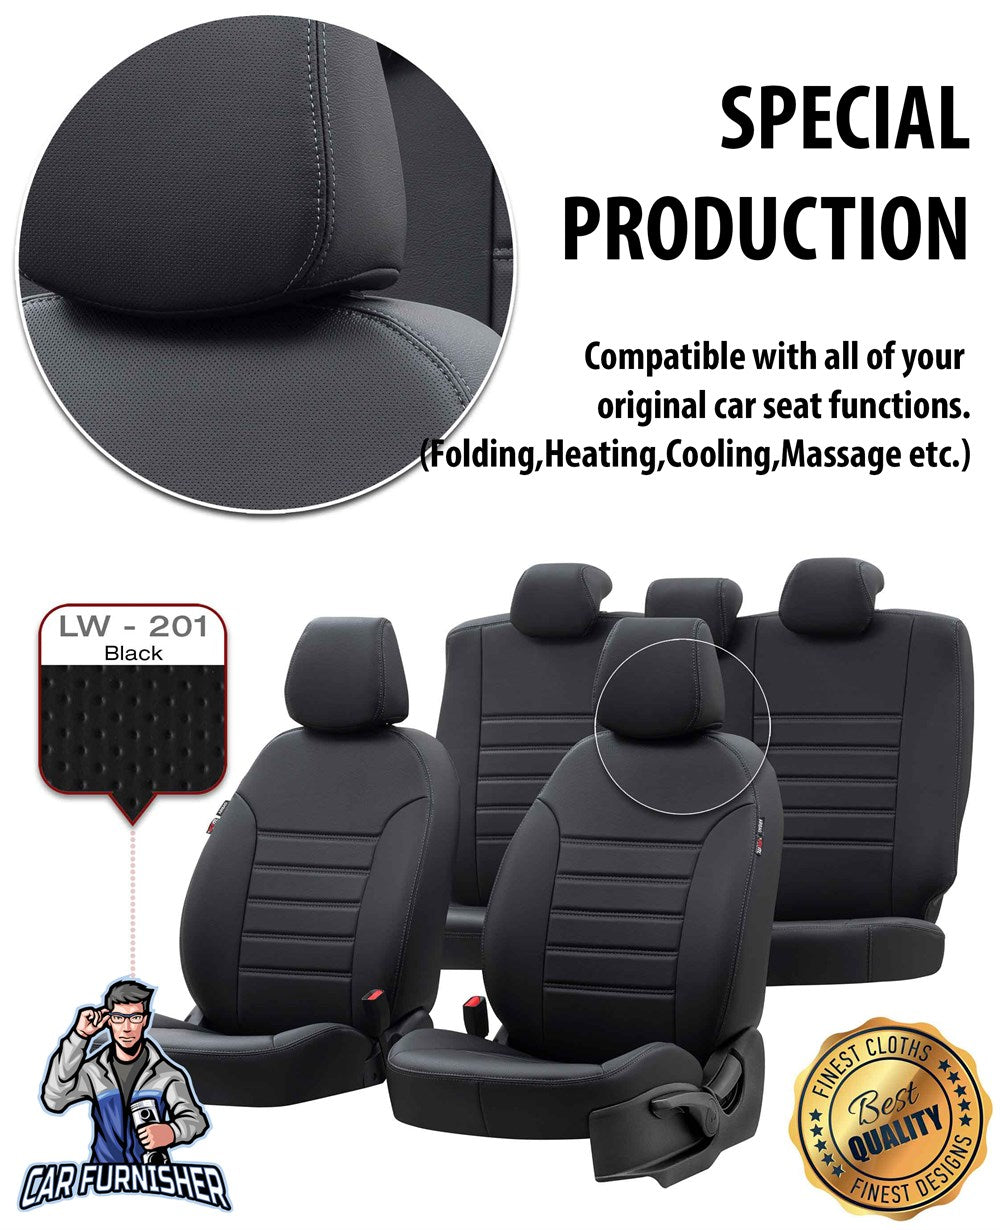 Mercedes Citan Seat Covers Istanbul Leather Design Smoked Black Leather